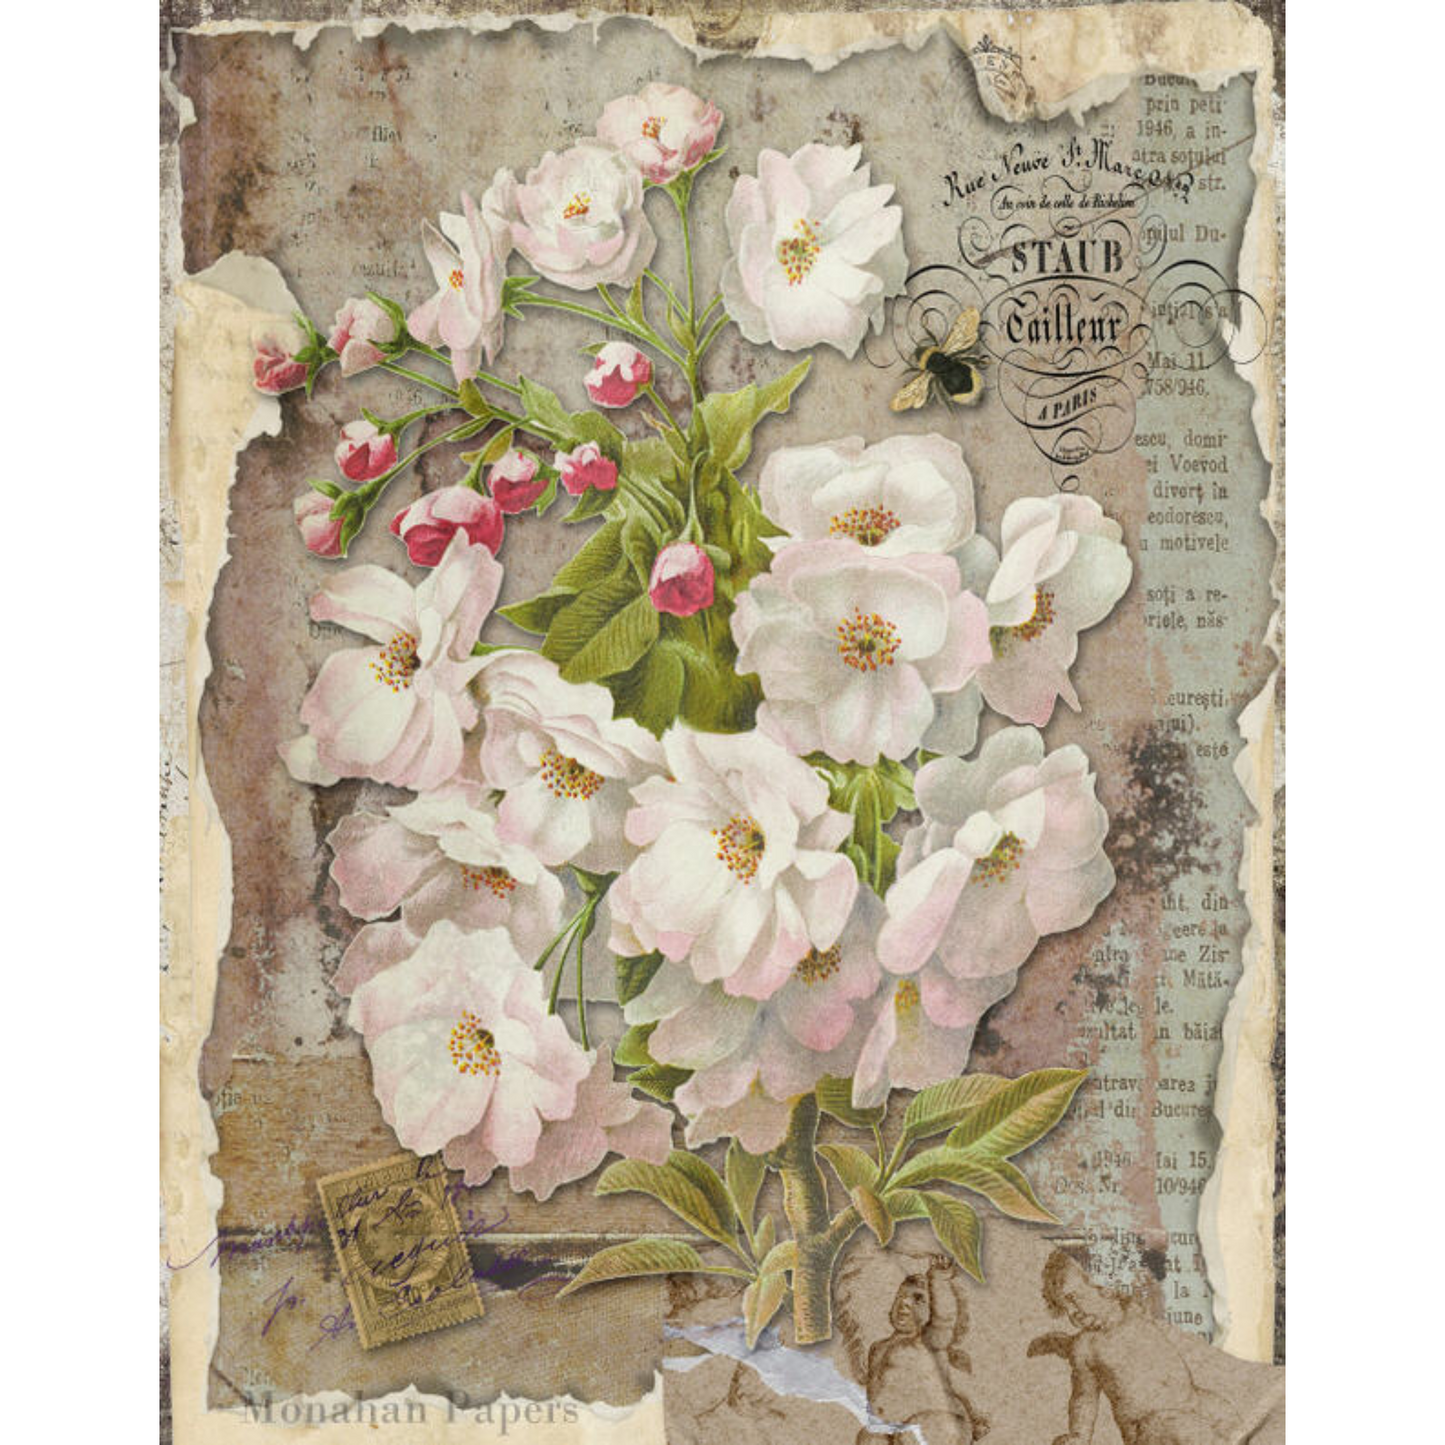 "Botanical 142" decoupage paper by Monahan Papers. size 11" x 17" available at MIlton's Daughter.